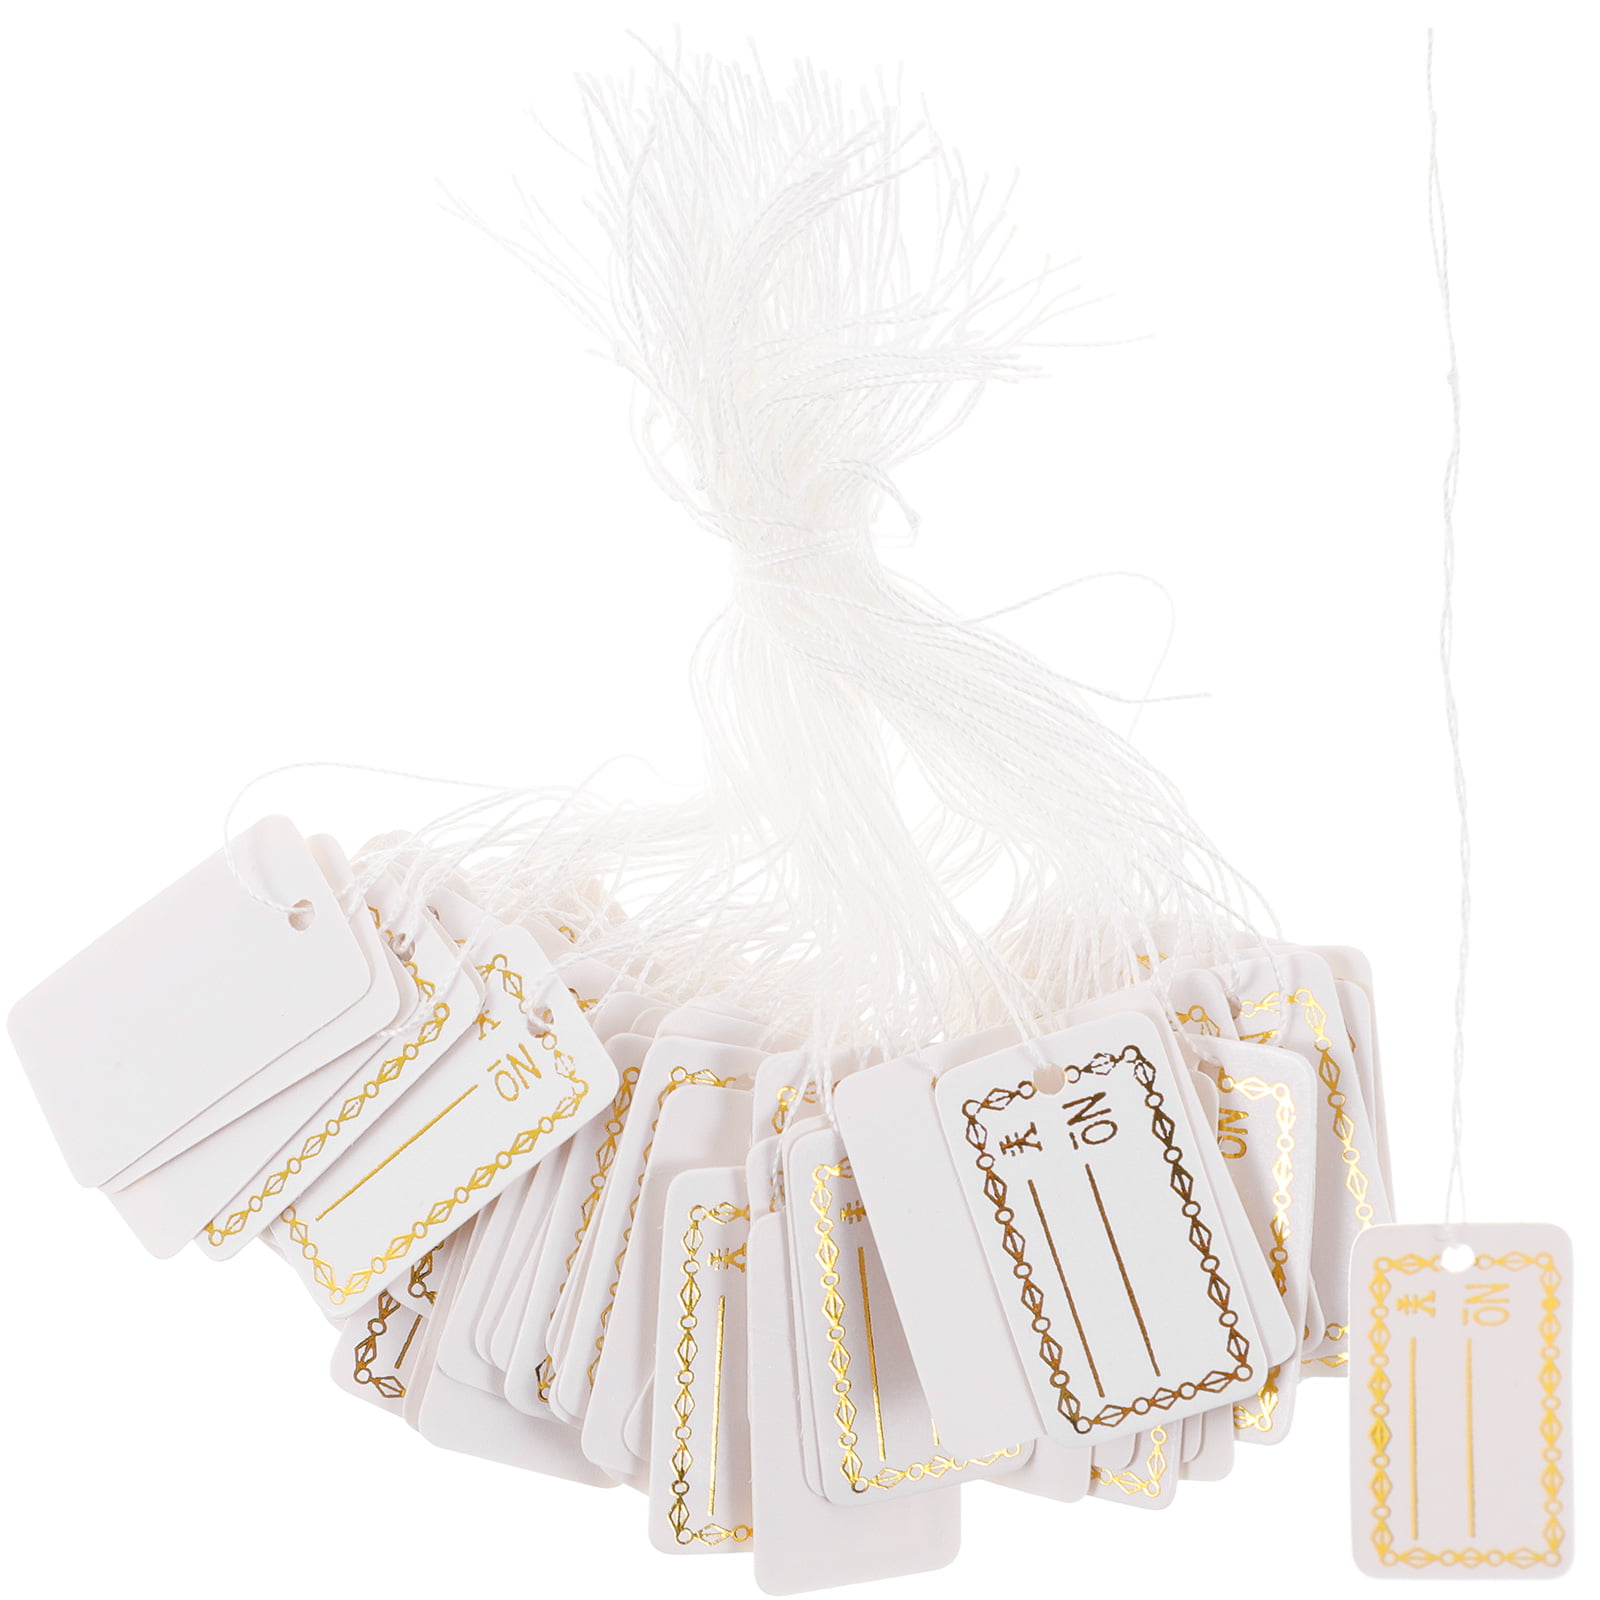 500Pcs Trinkets Tags with String Hanging Price Tags Writable